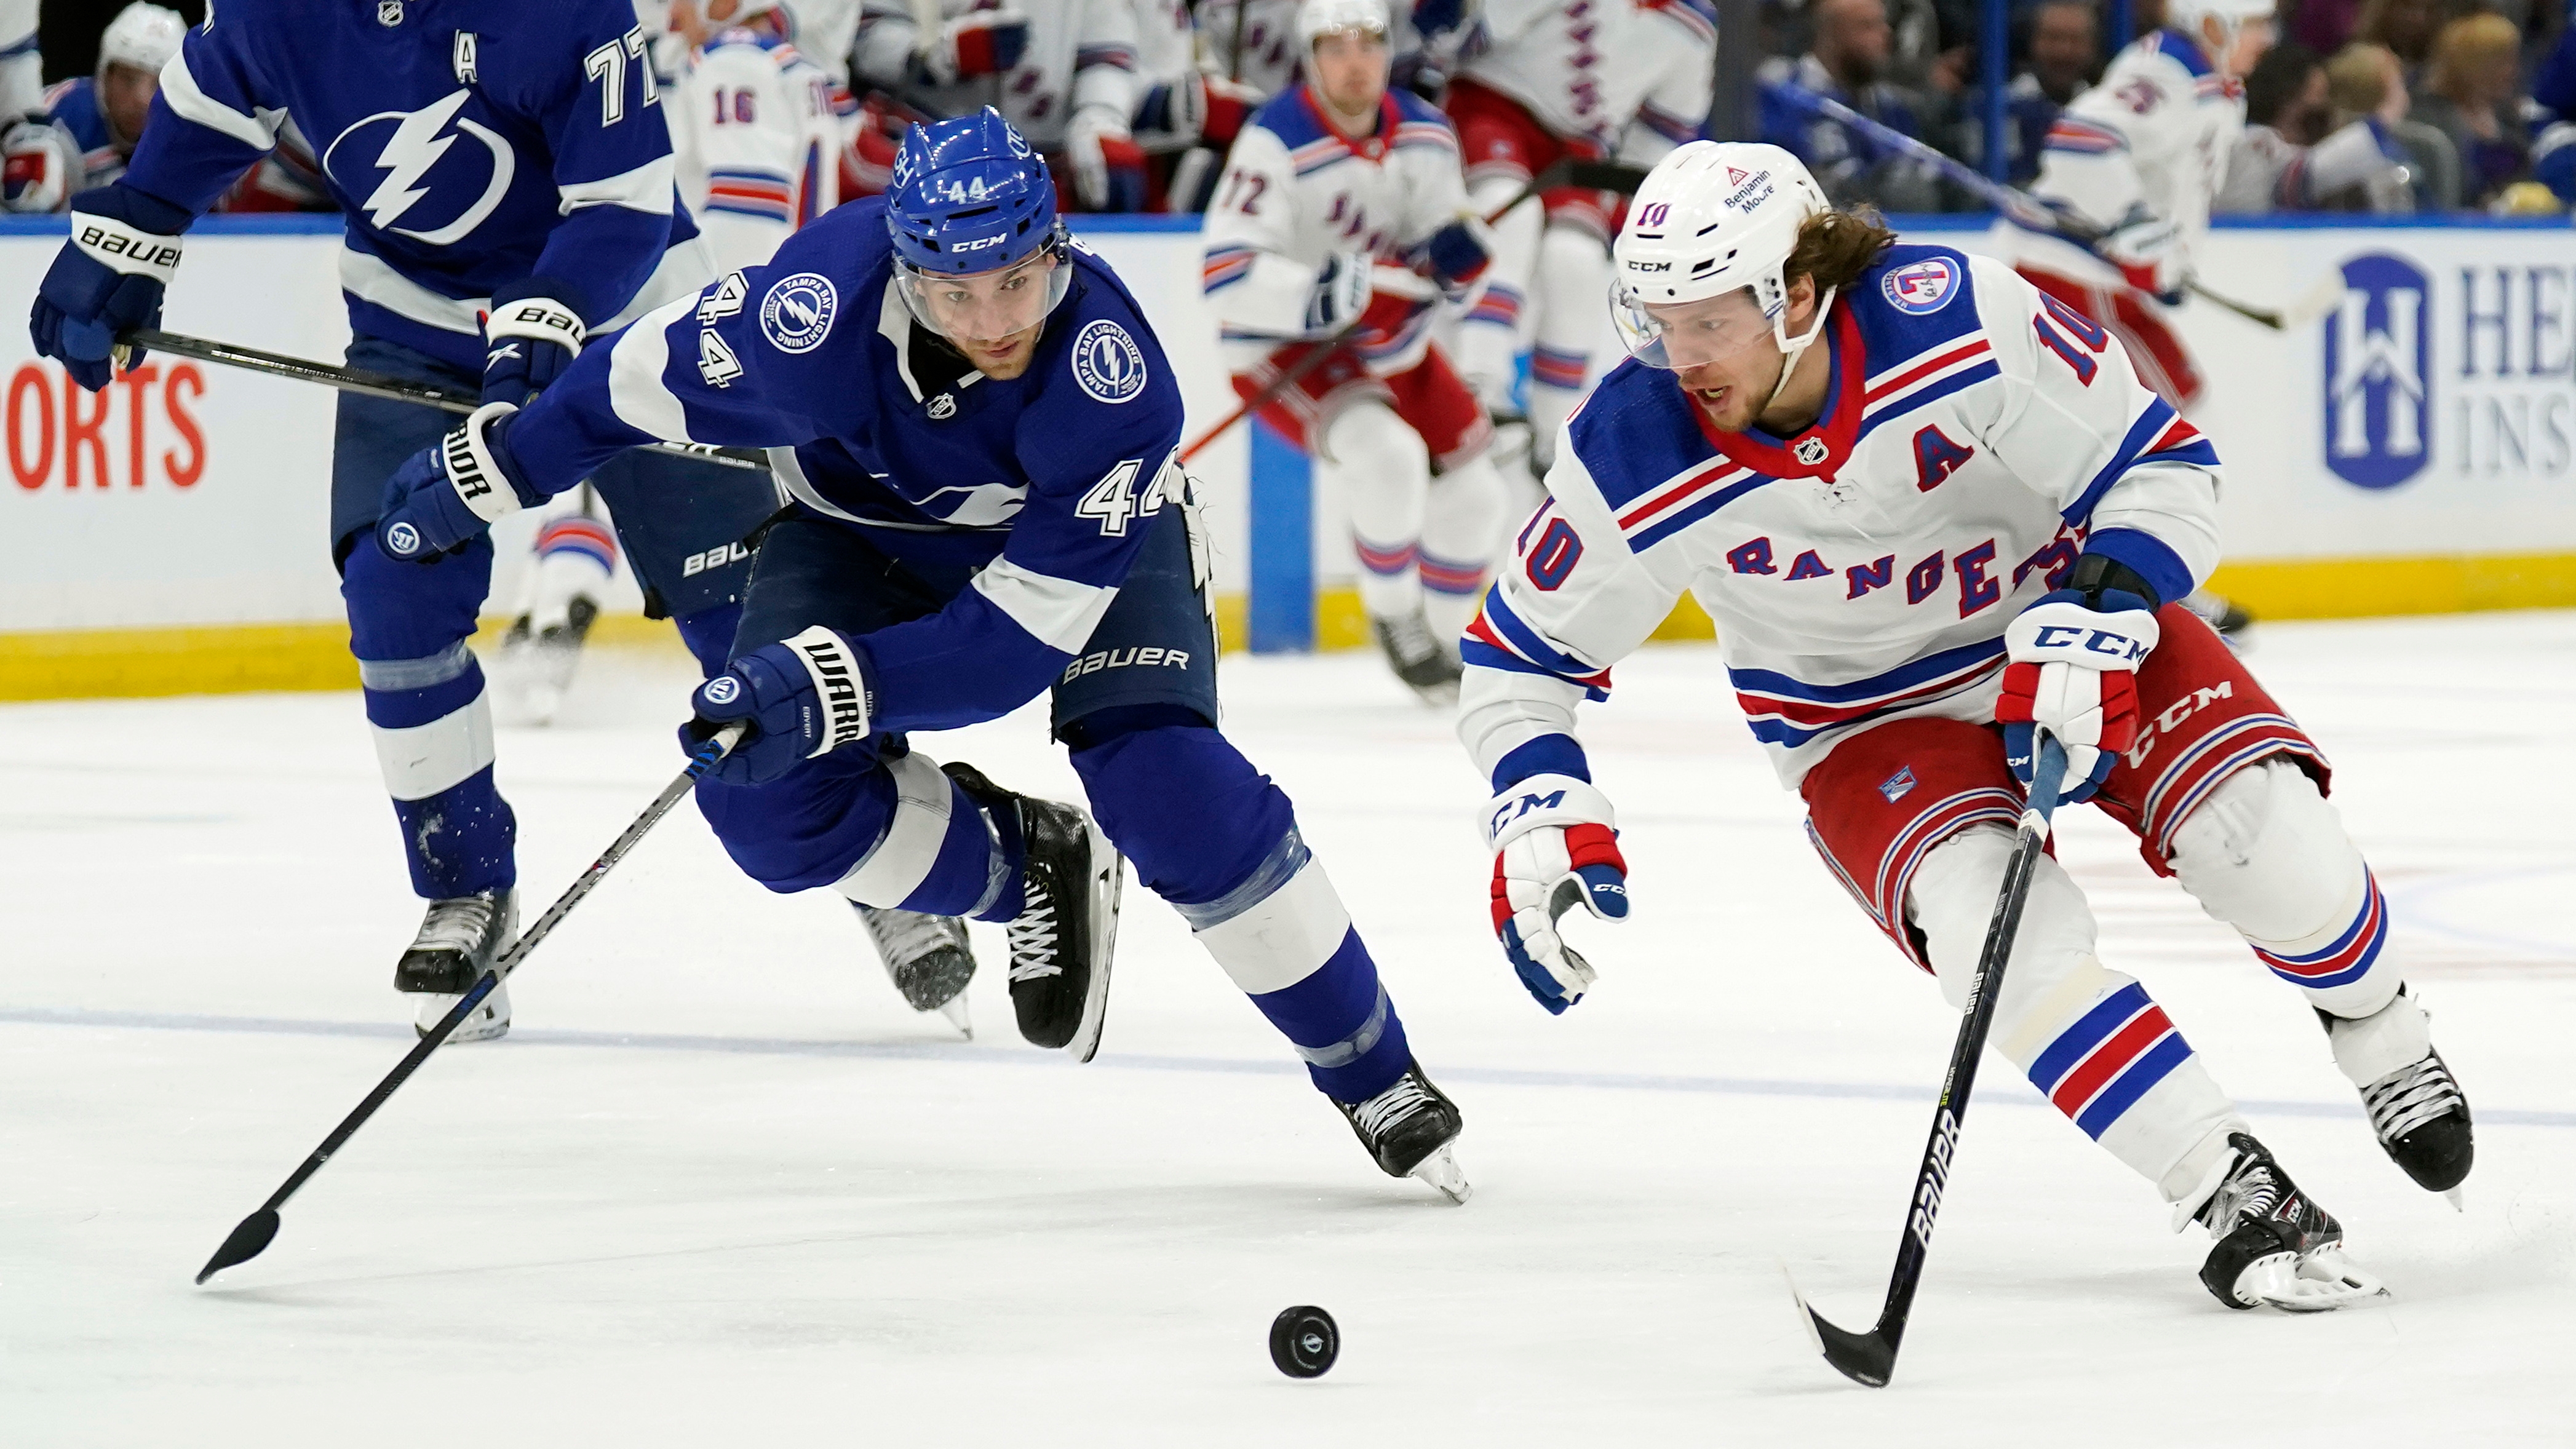 Lightning energized for series with Rangers